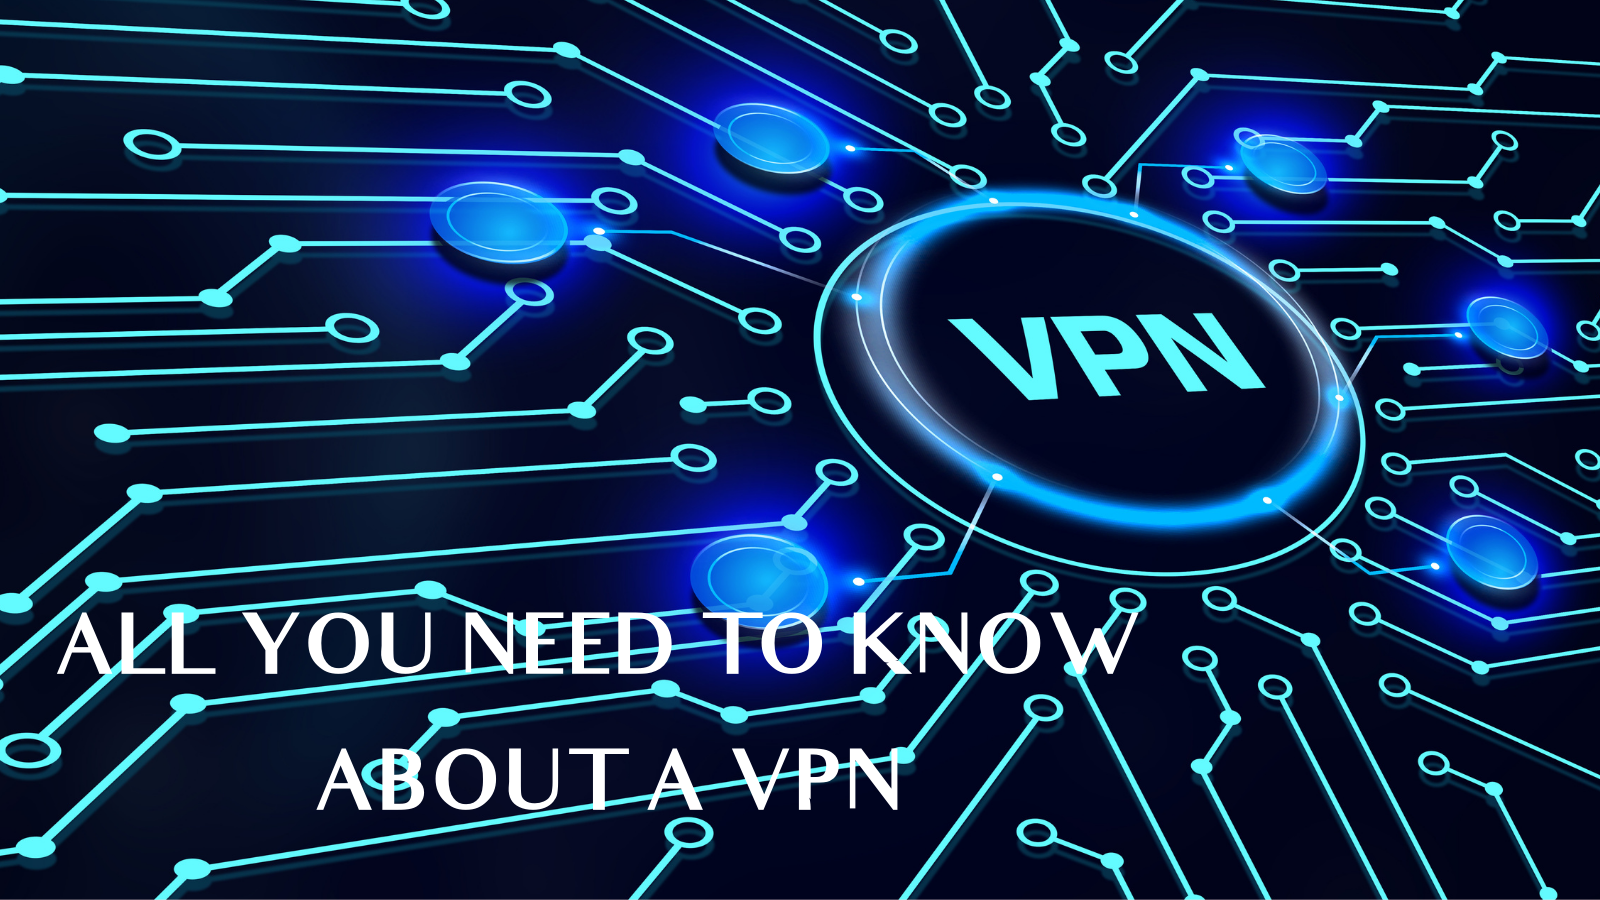 All You Need To Know About A VPN